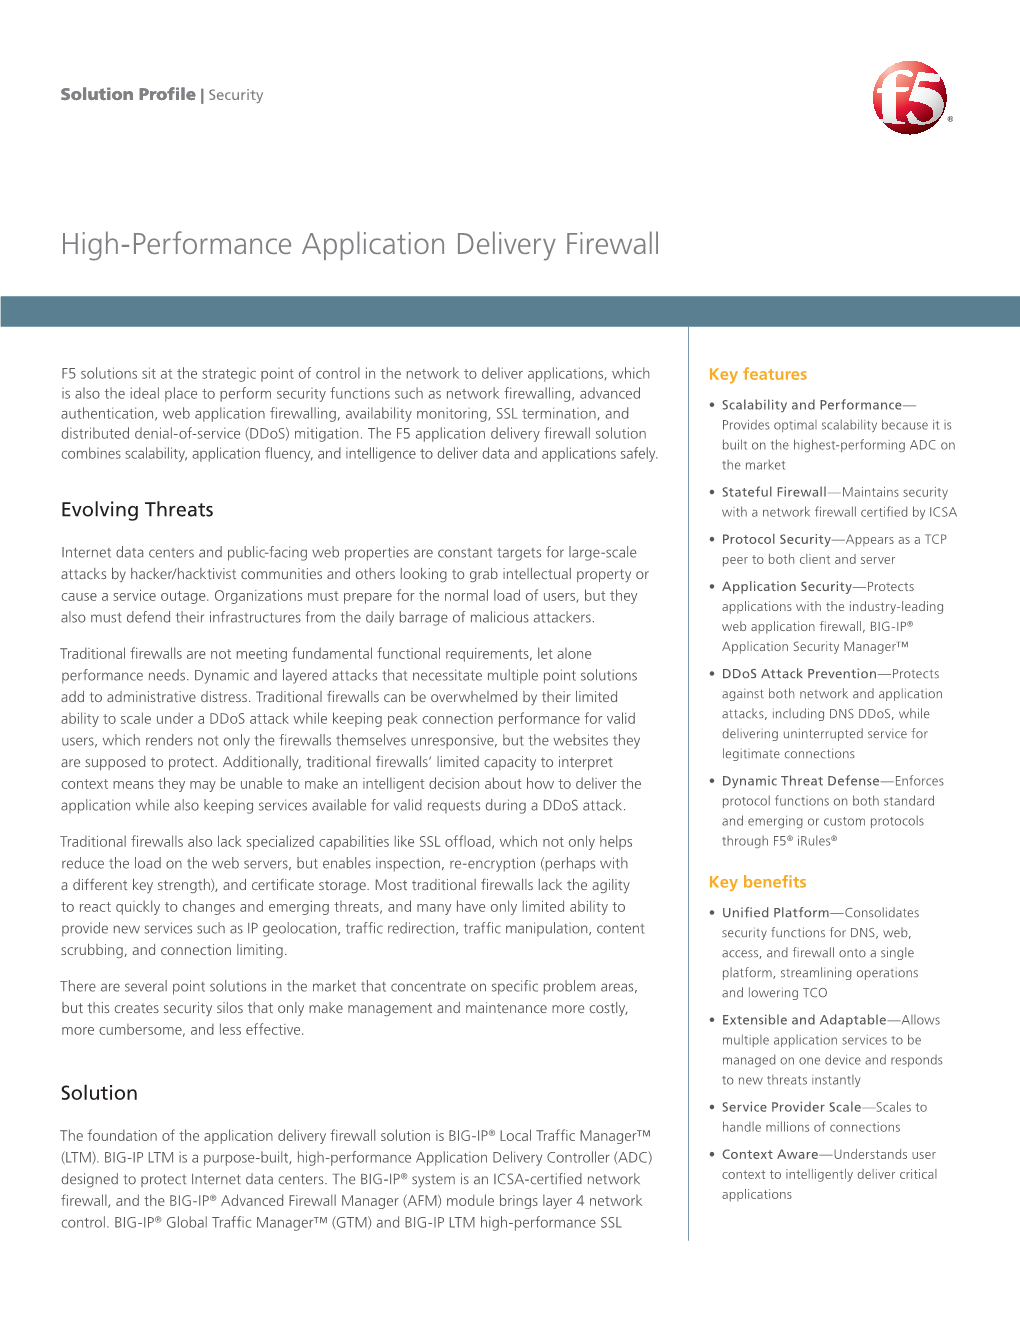 High-Performance Application Delivery Firewall